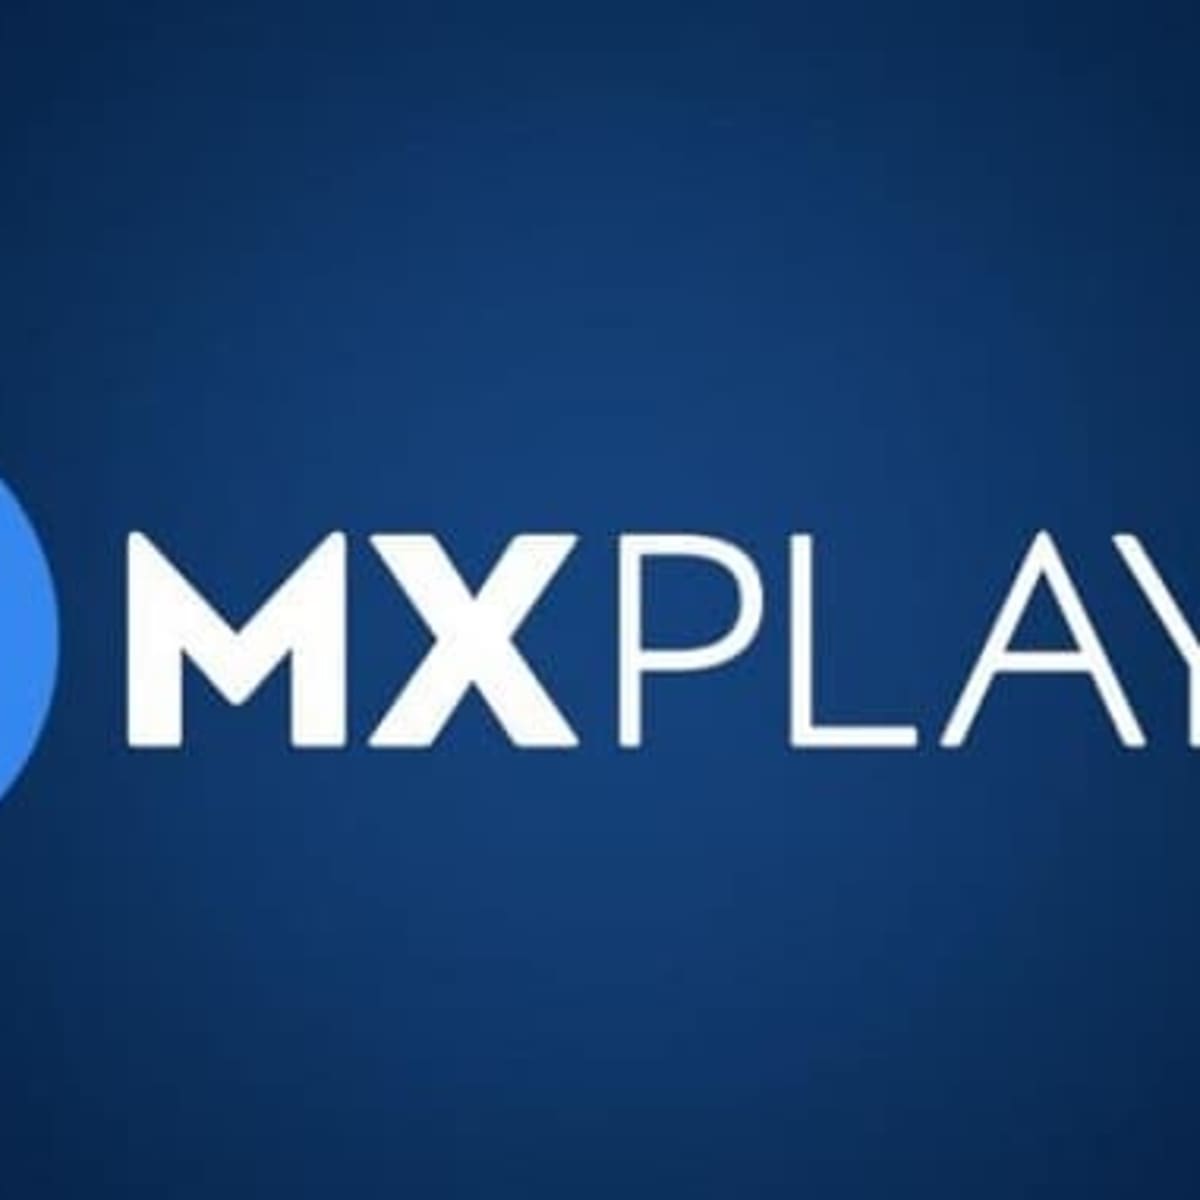 All MX Player Web Series Cast With Actress Names & Images